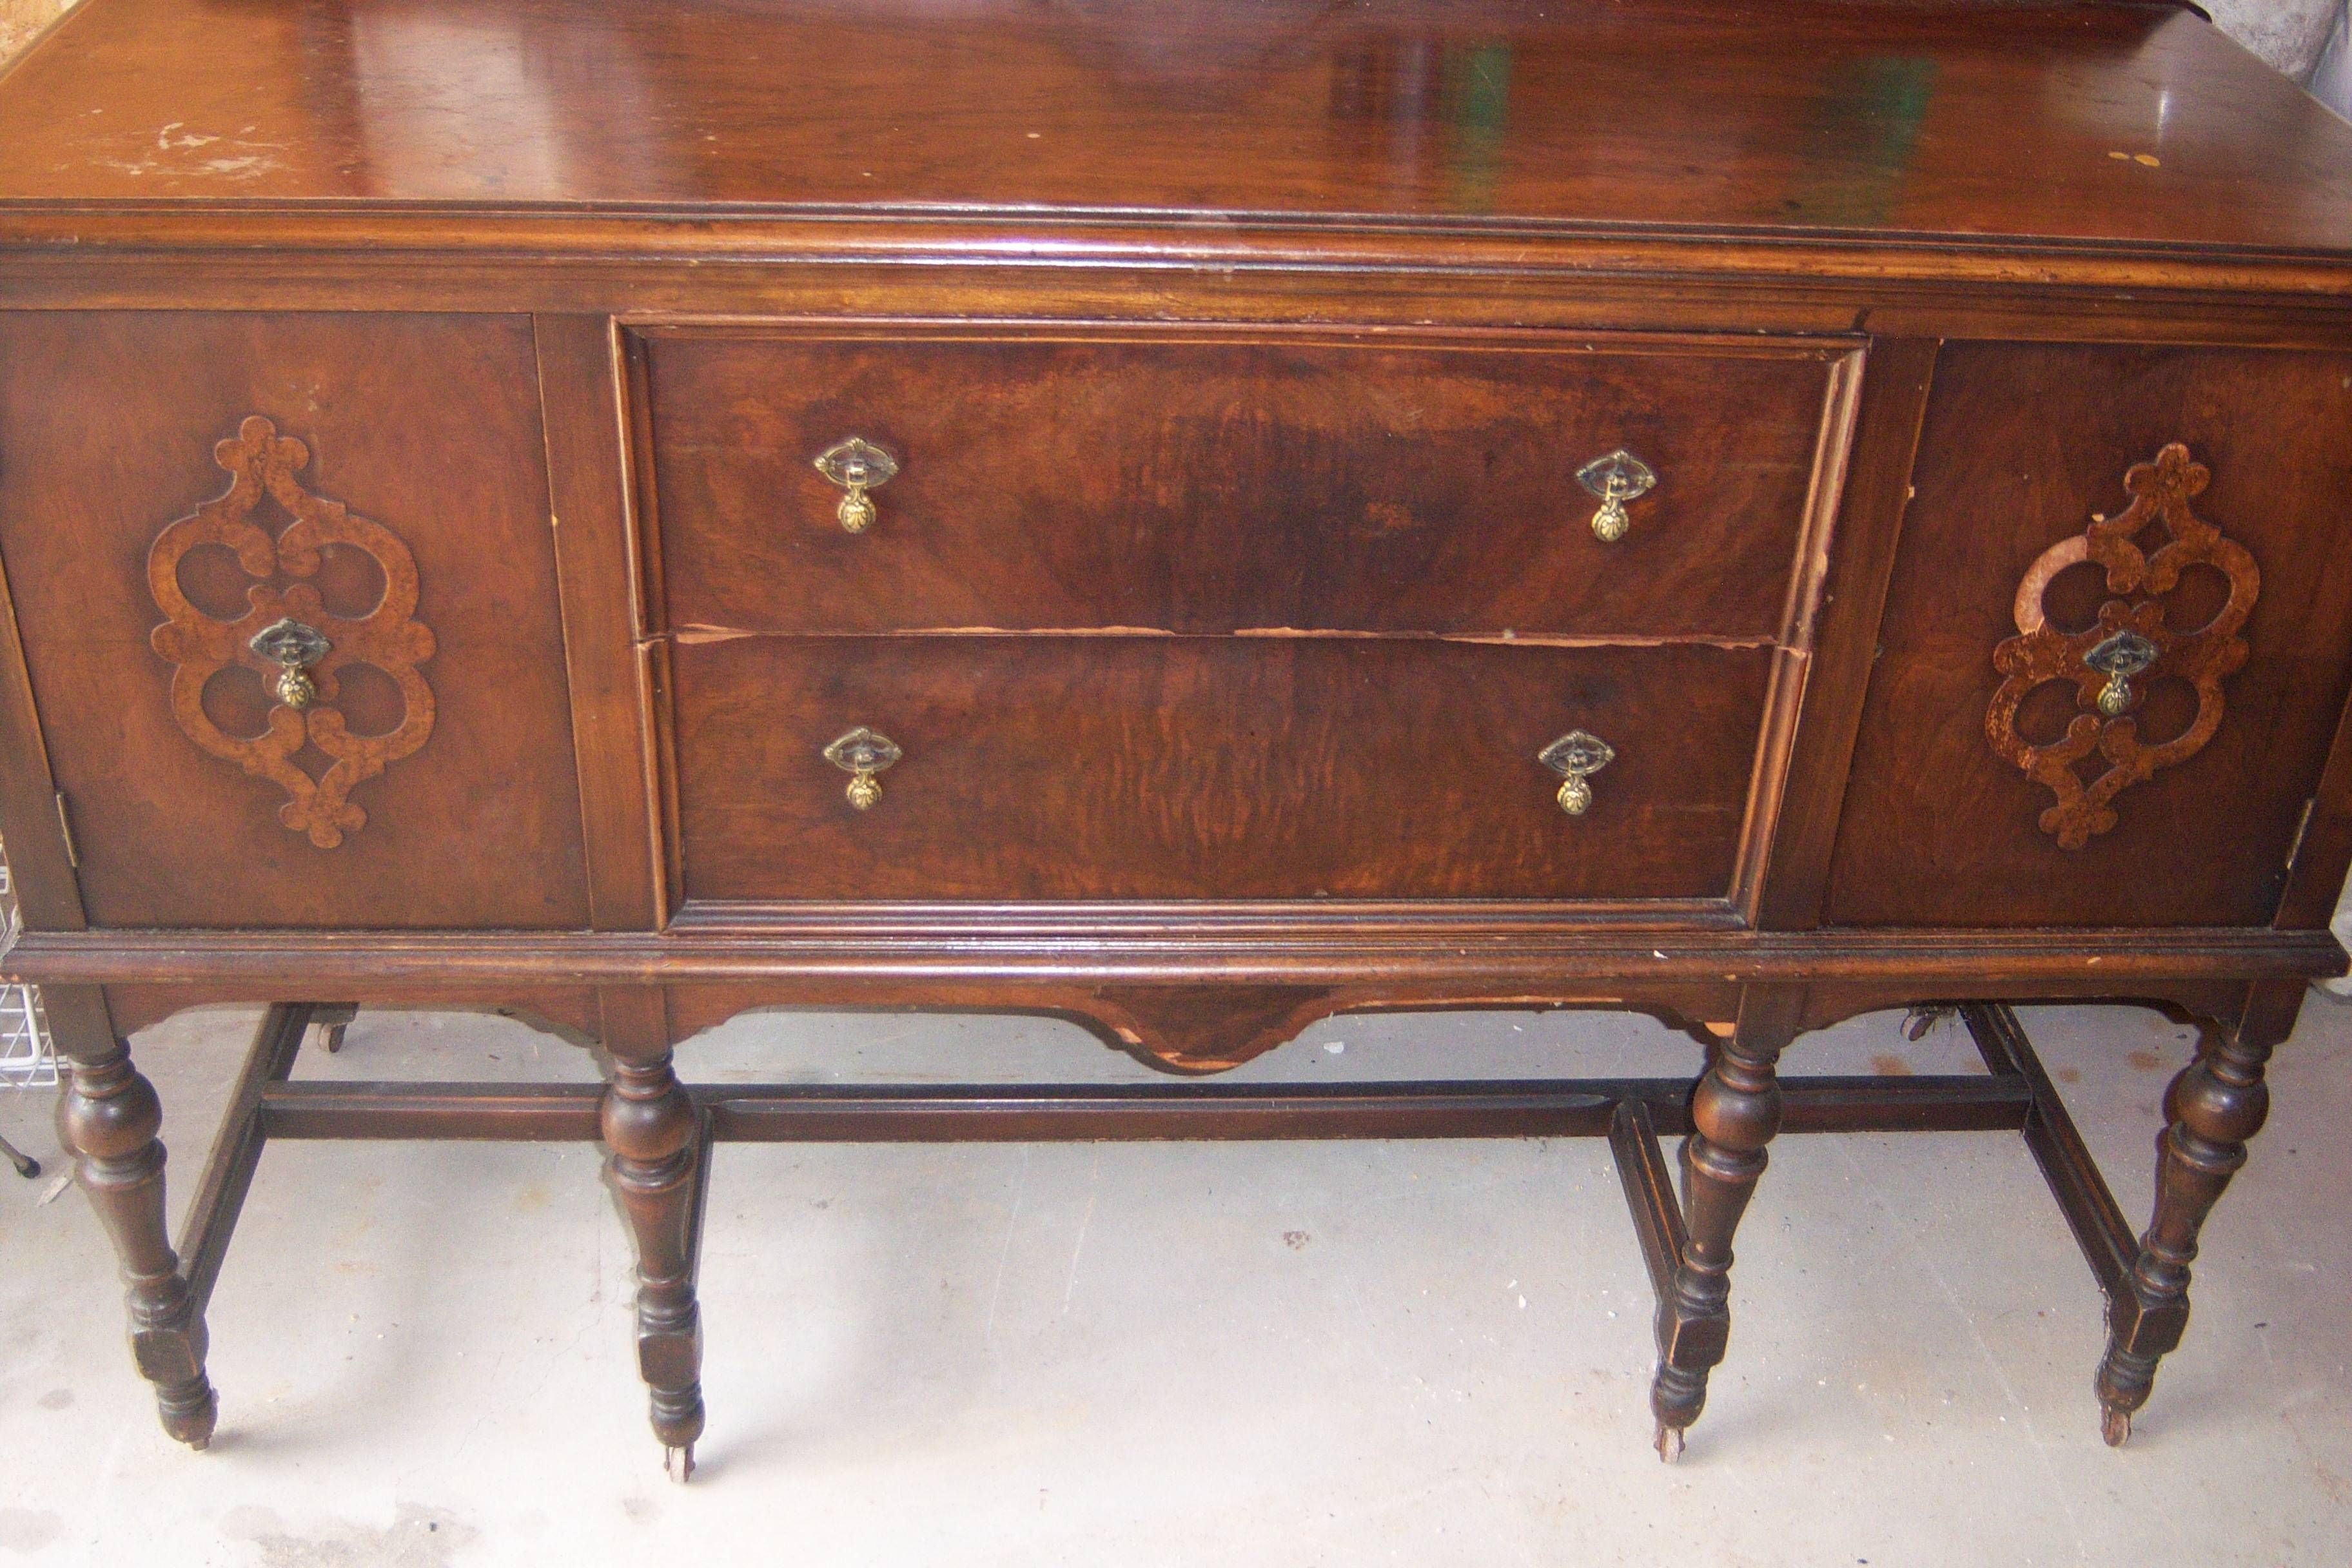 Elegant Antique Sideboards For Sale – Bjdgjy Within Recent Wooden Sideboards For Sale (View 3 of 15)